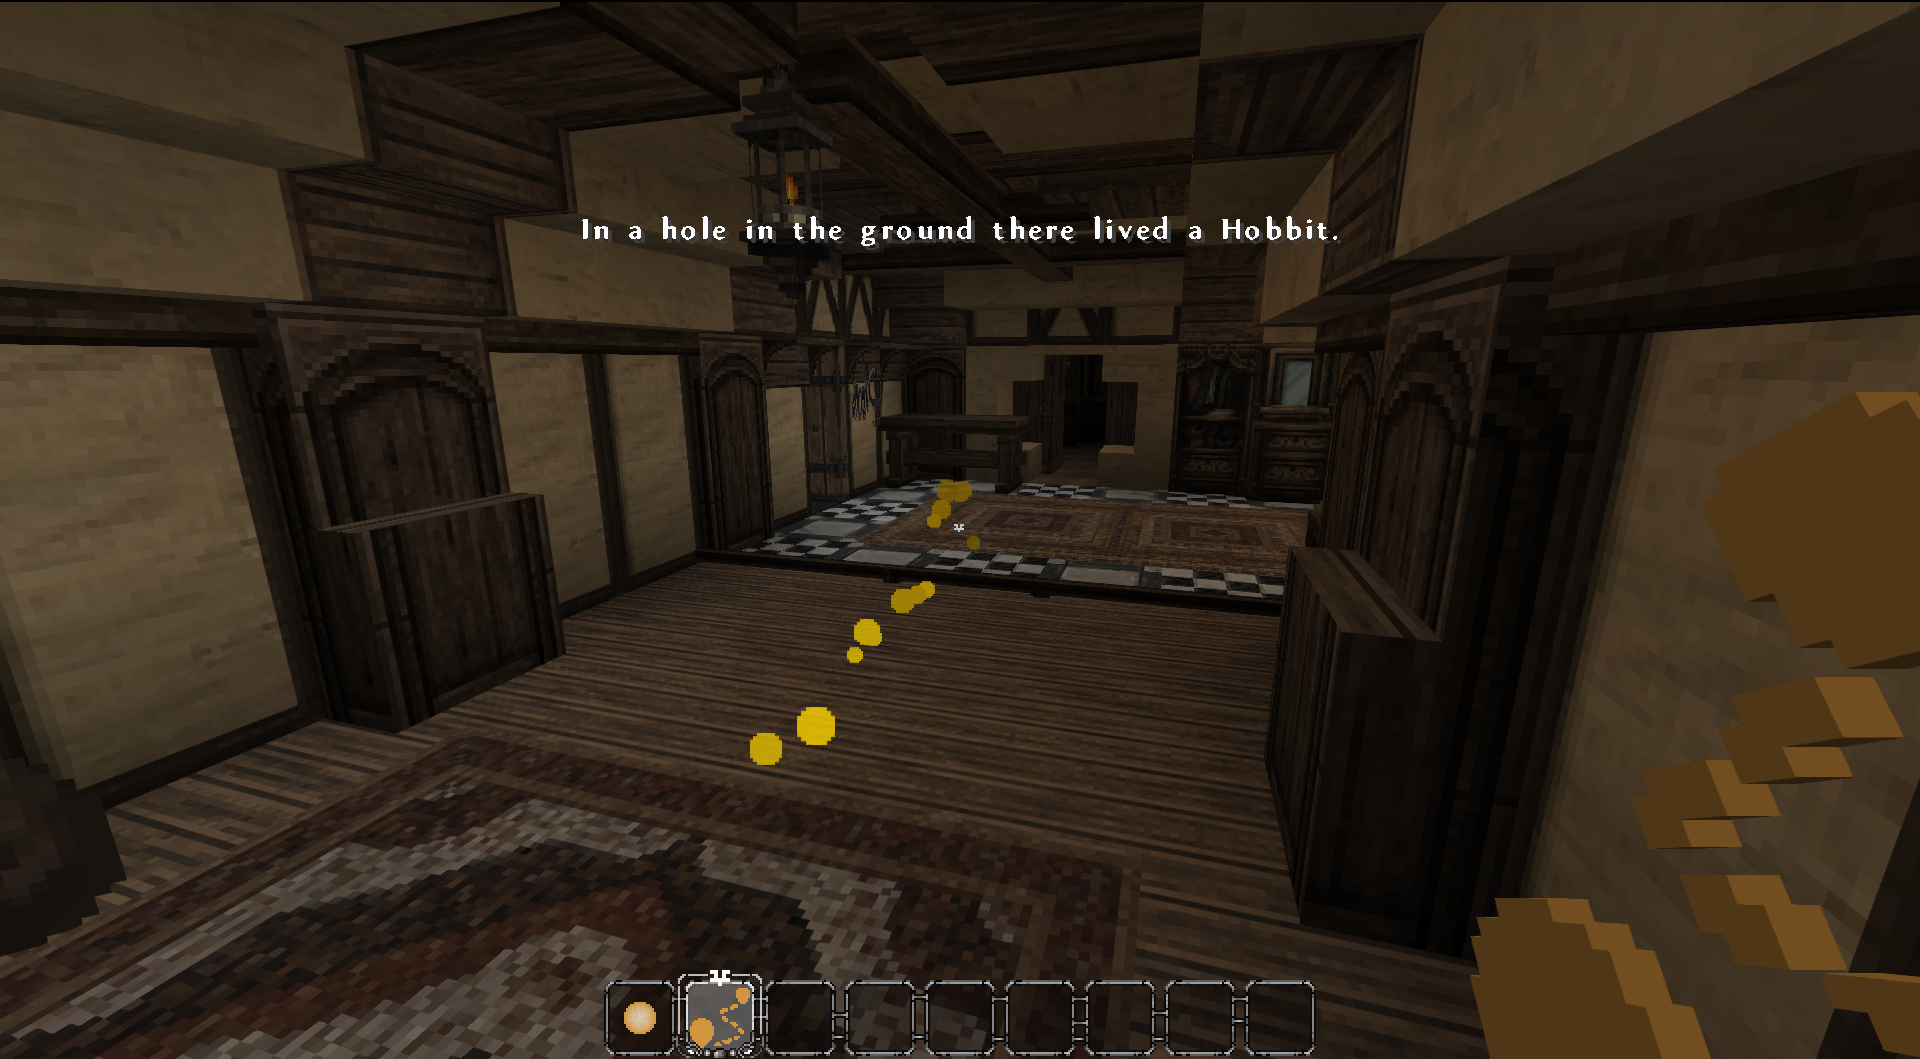 Path Markers can be configured to show in-world messages to give context about where the player is.